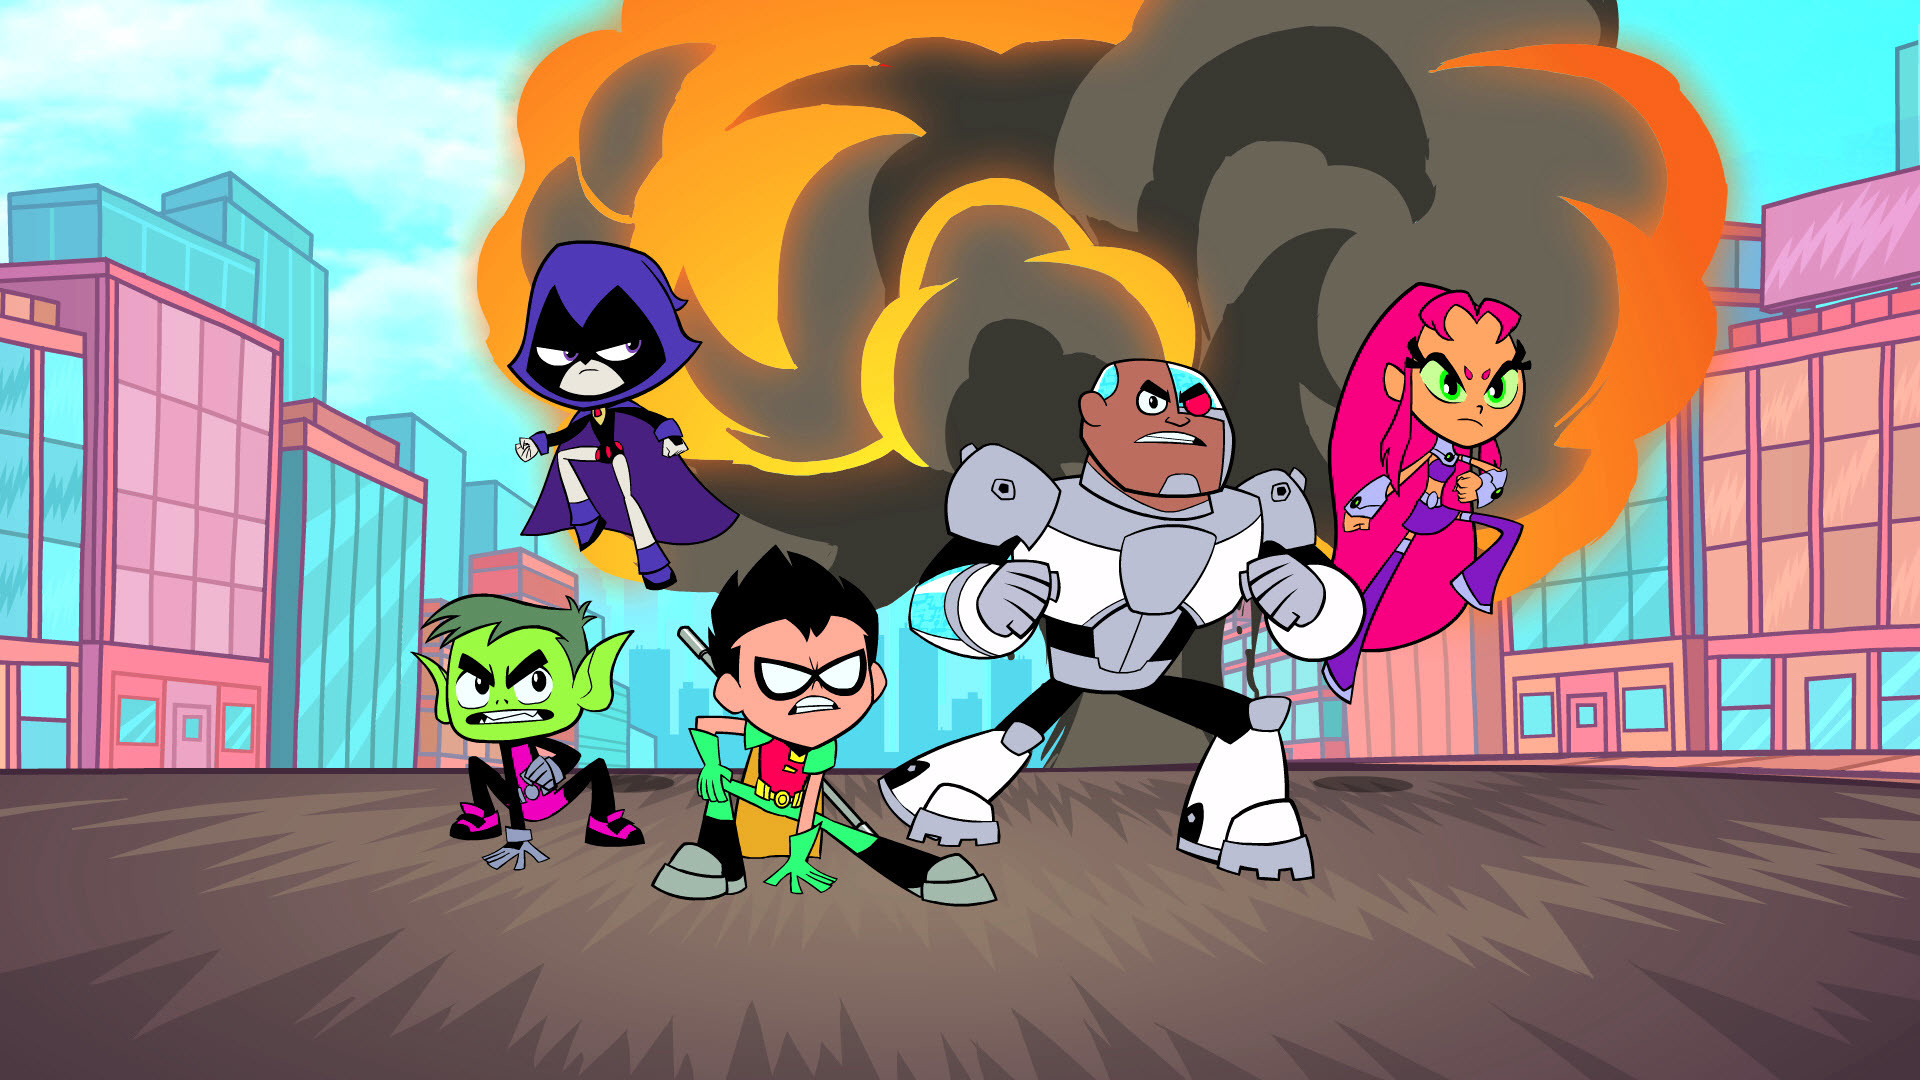 1920x1080 Teen Titans Go HD Wallpapers Backgrounds Wallpaper | HD Wallpapers |  Pinterest | Teen titans, Hd wallpaper and Wallpaper